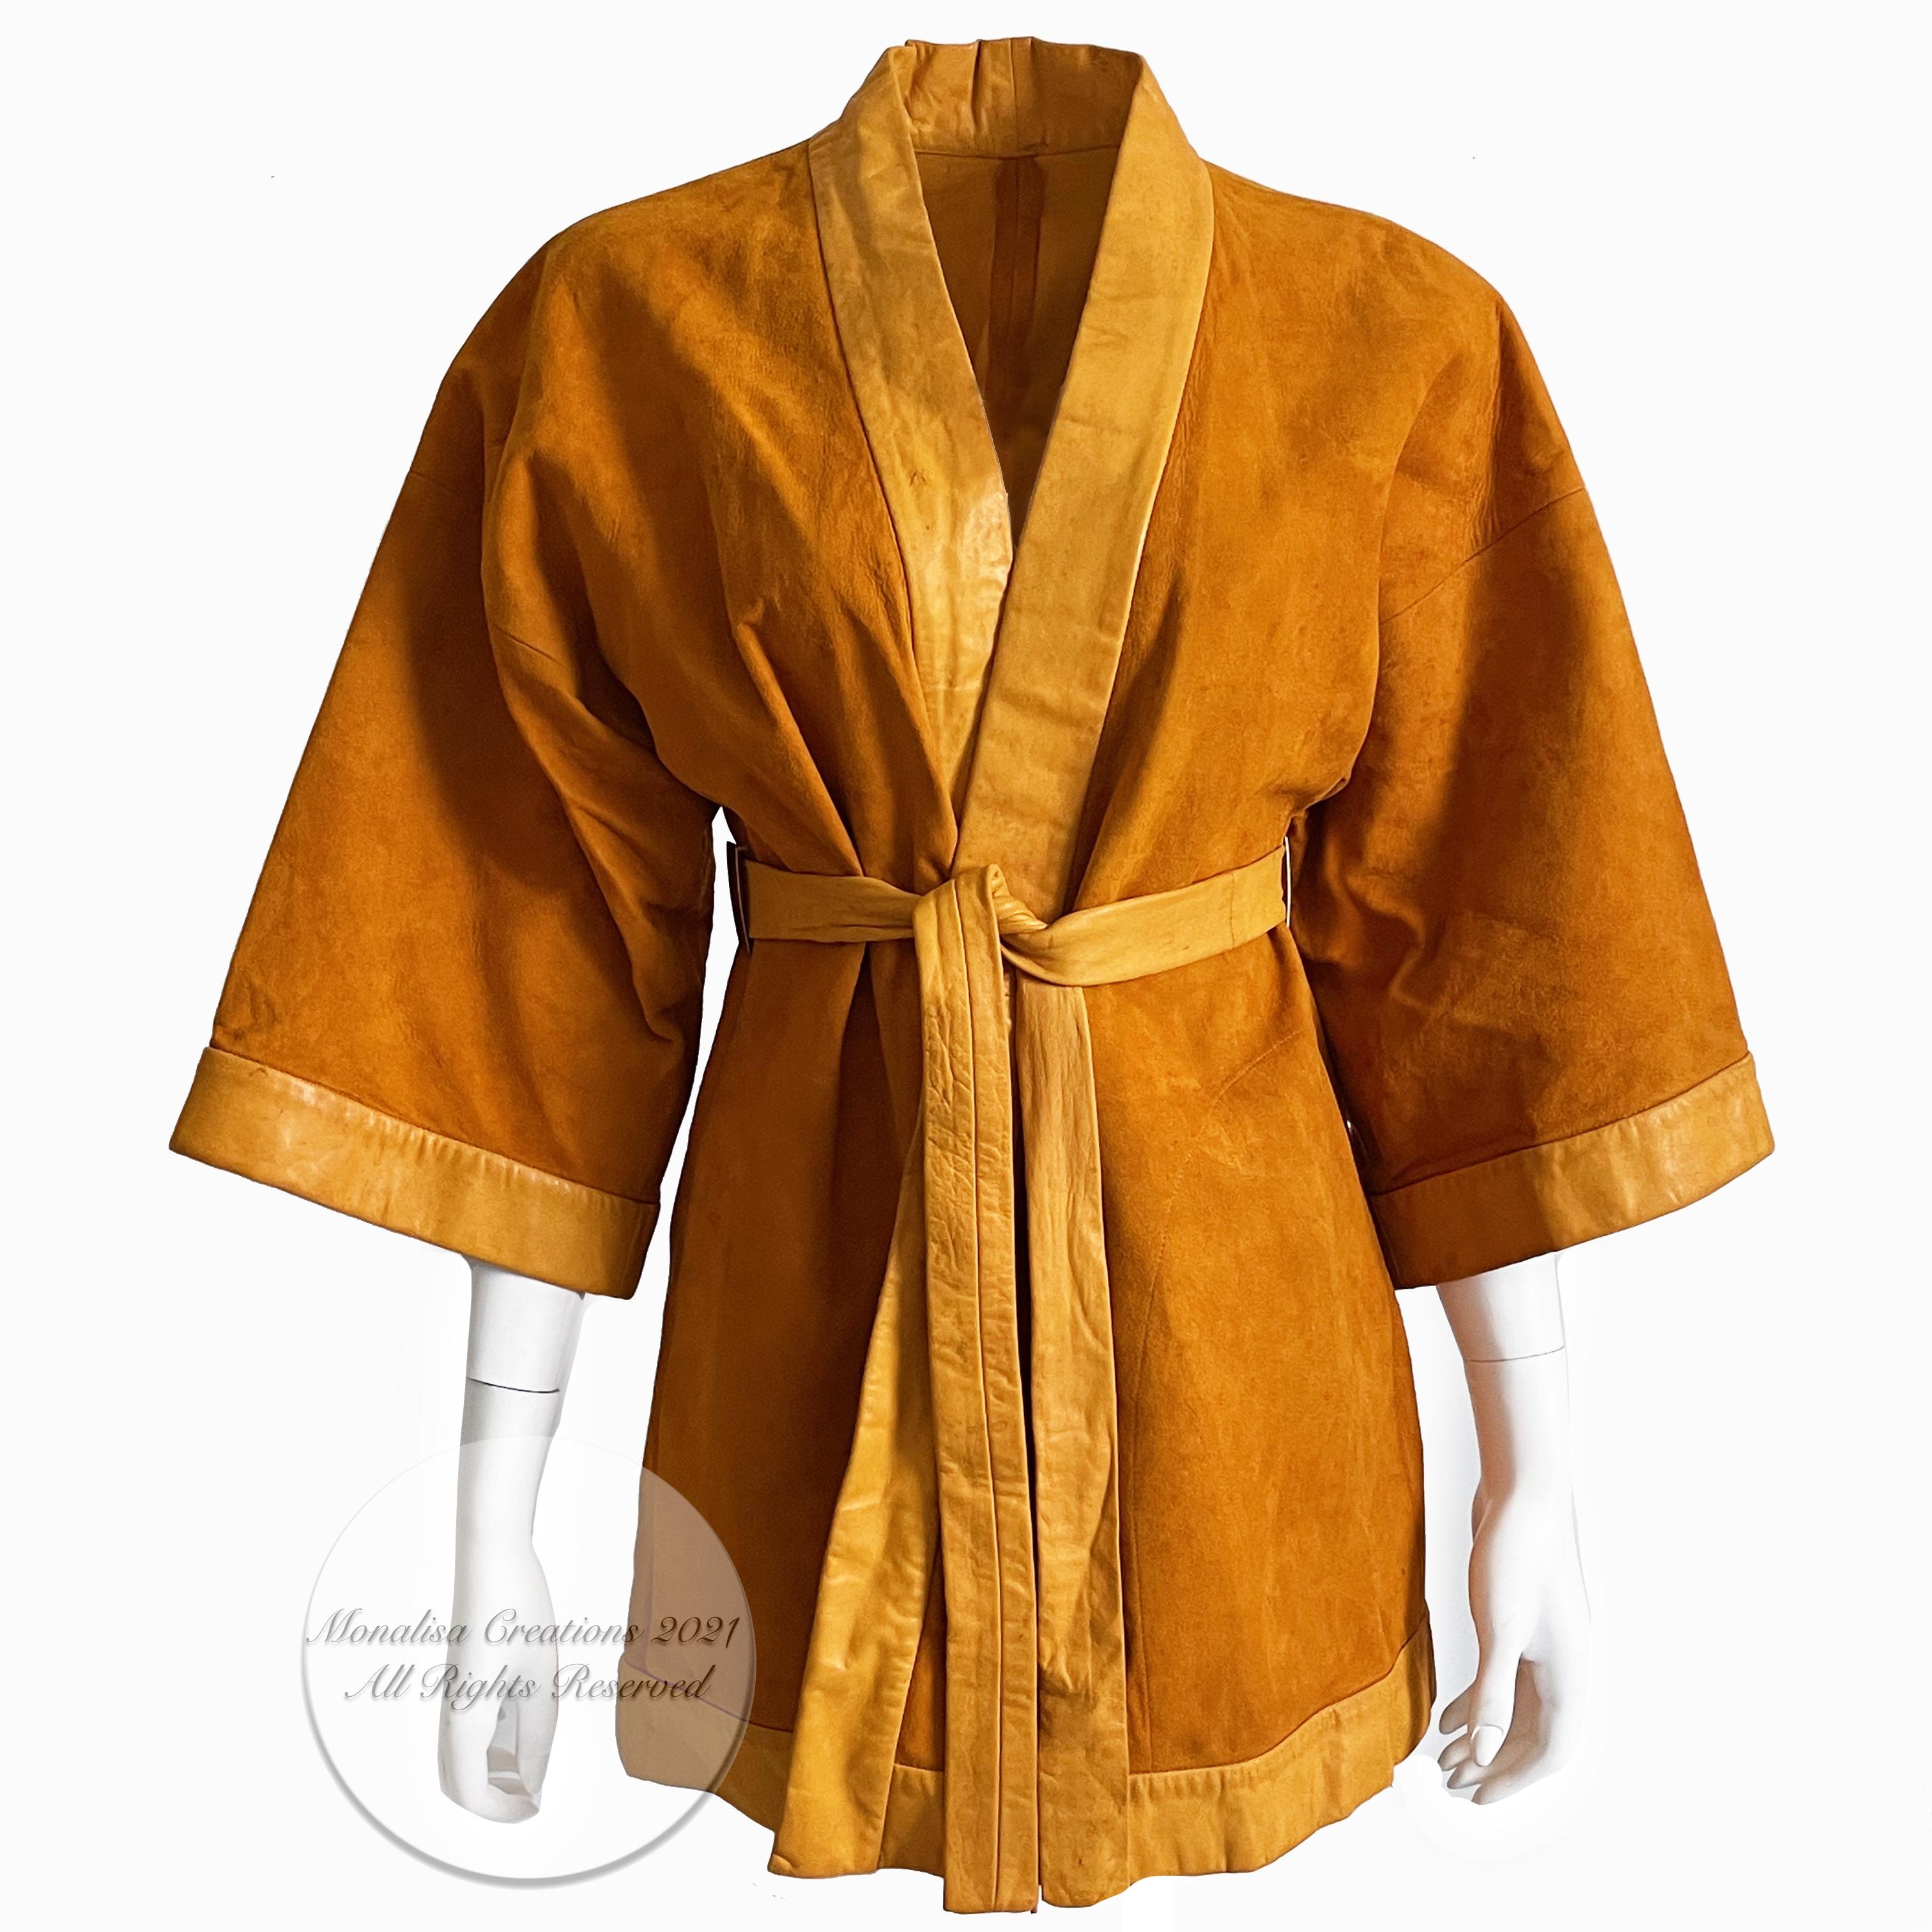 Authentic, preowned, vintage 60s Bonnie Cashin for Sills Kimono Style Jacket, likely made in the 1960s. Originally sold by Saks Fifth Ave. Made from dark orange or pumpkin-hued suede with smooth leather trim & belt, it's unlined with half-moon